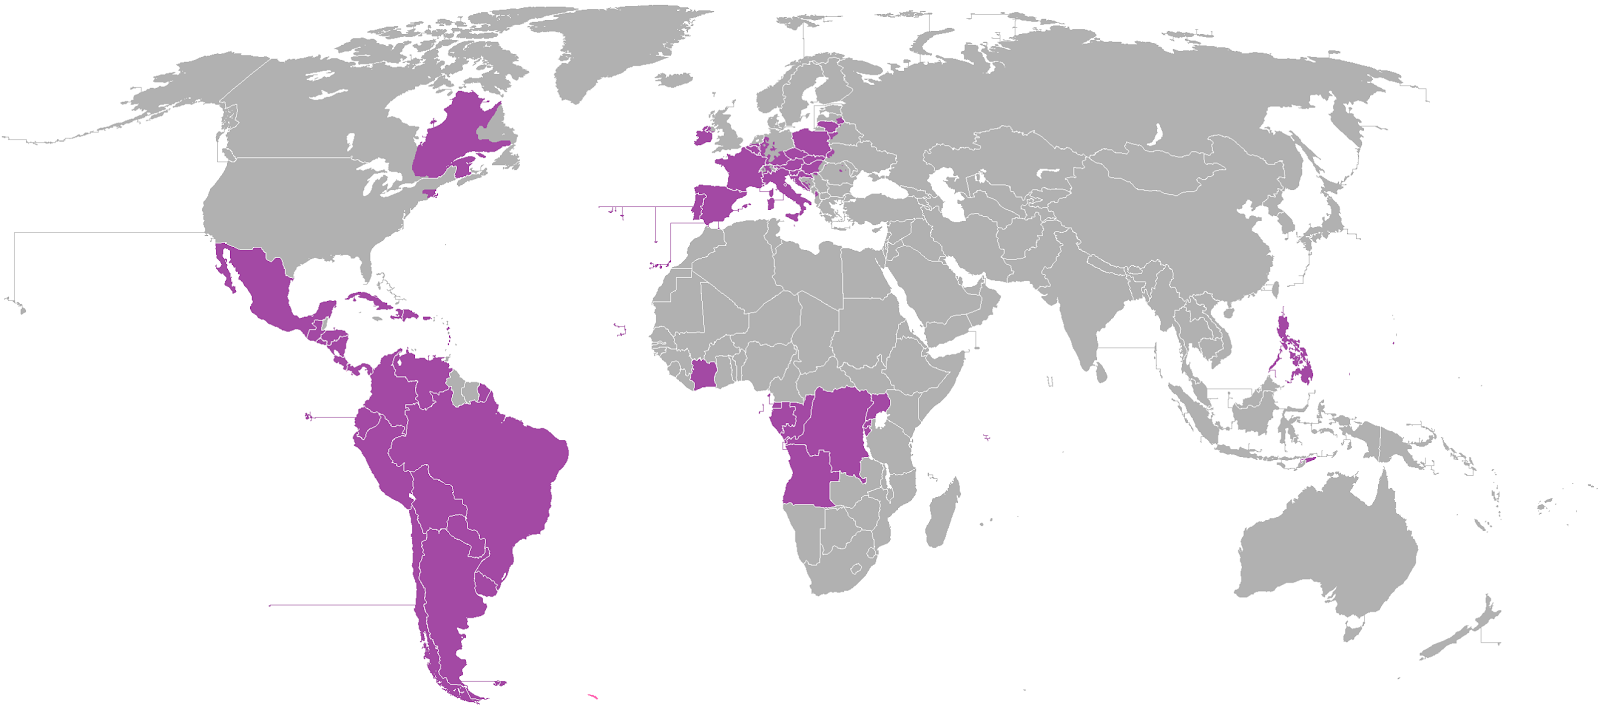 A map showing countries of the world with a Catholic majority